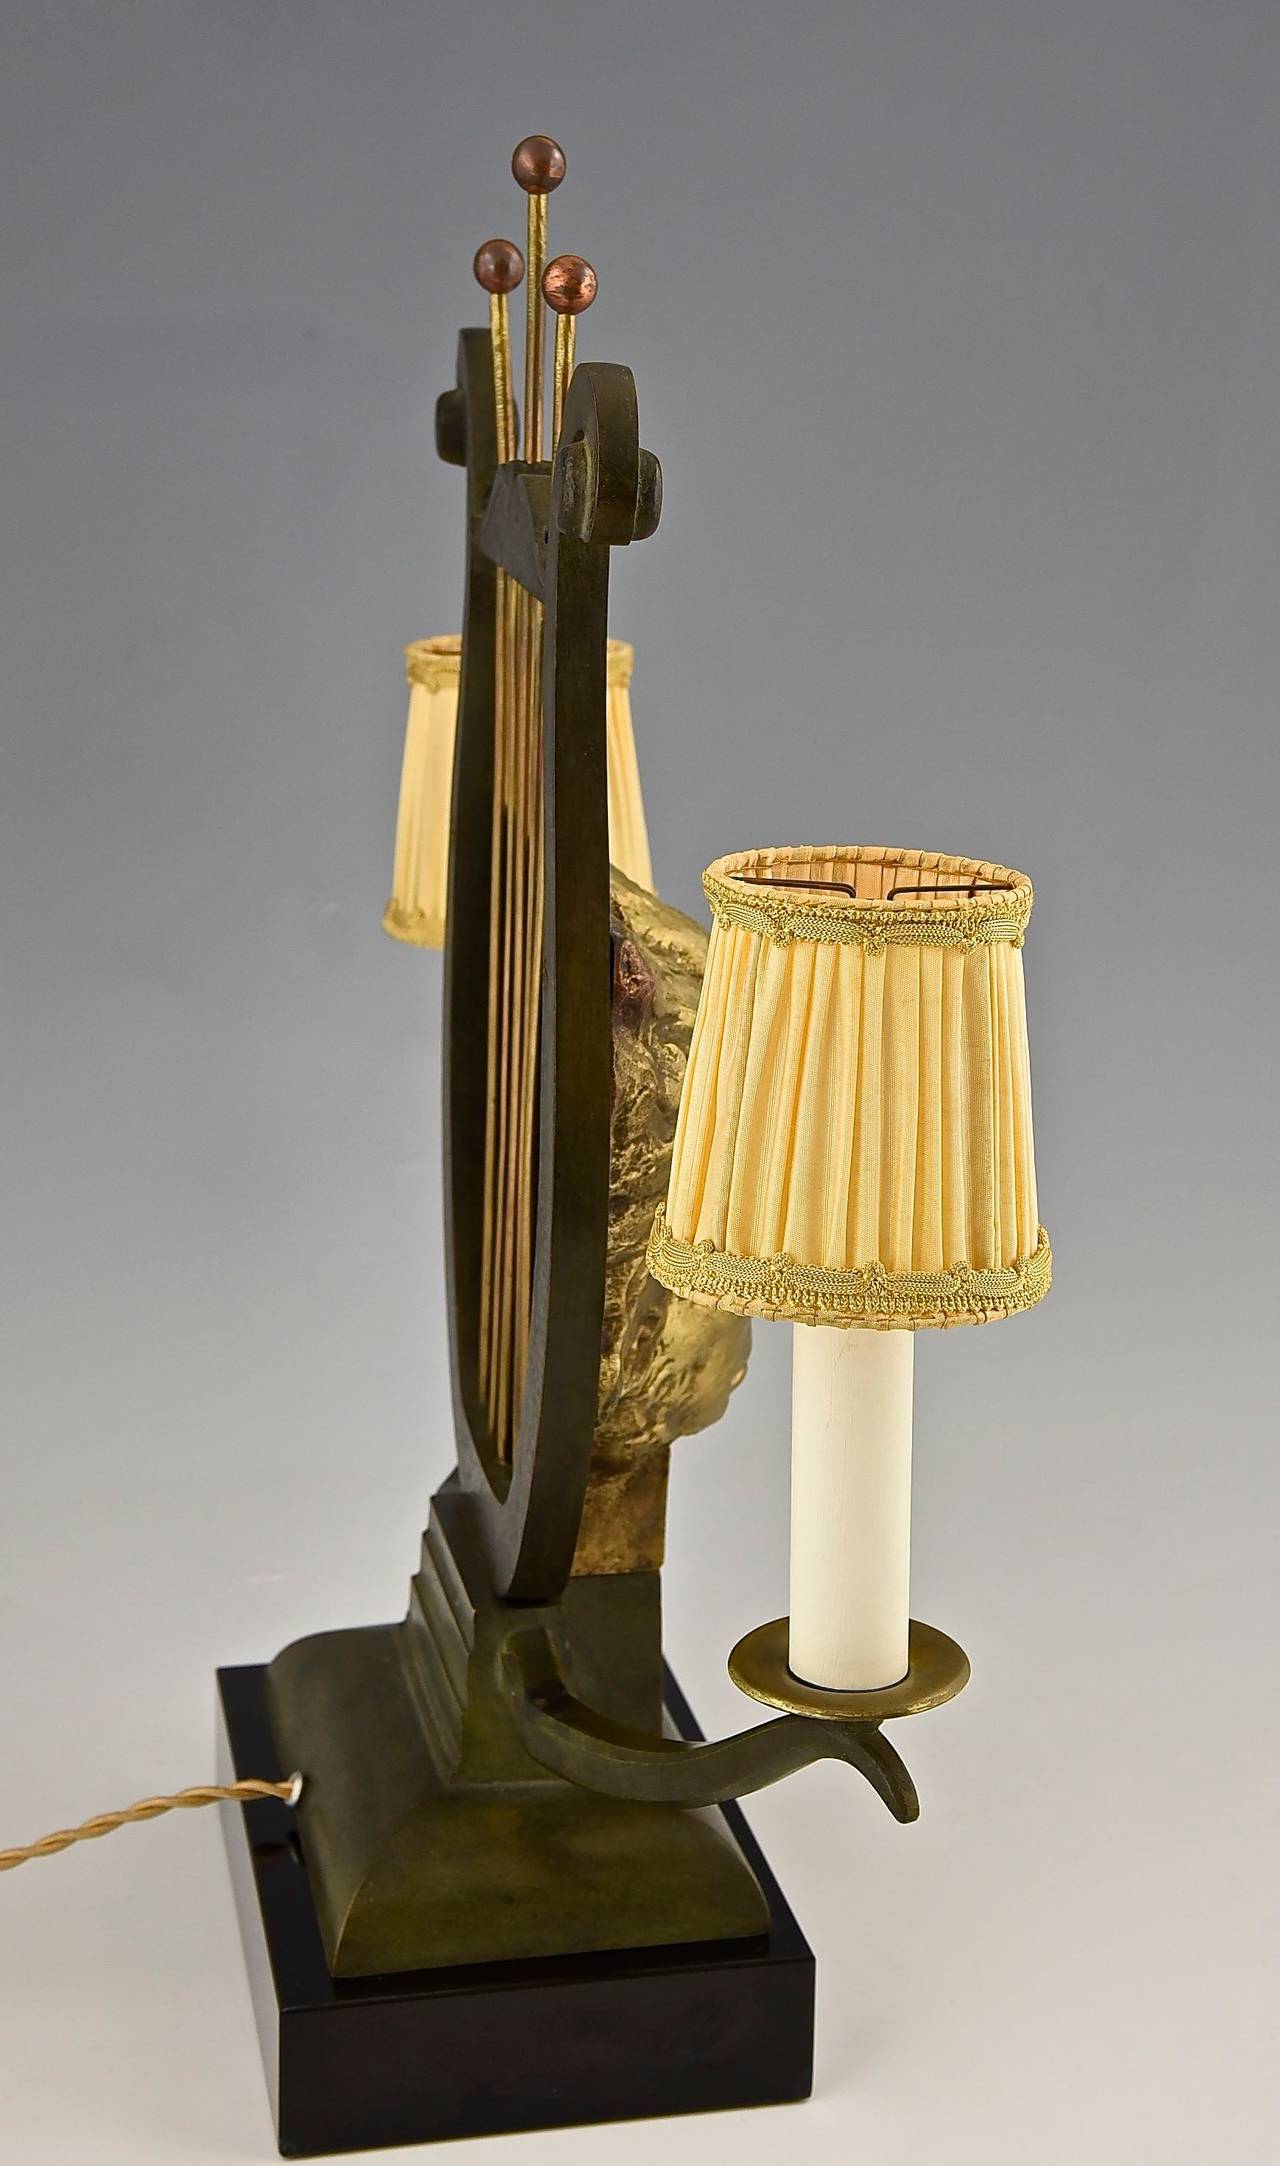 Mid-20th Century French Art Deco Bronze Lamp with Head of Beethoven by G. Garreau, 1935